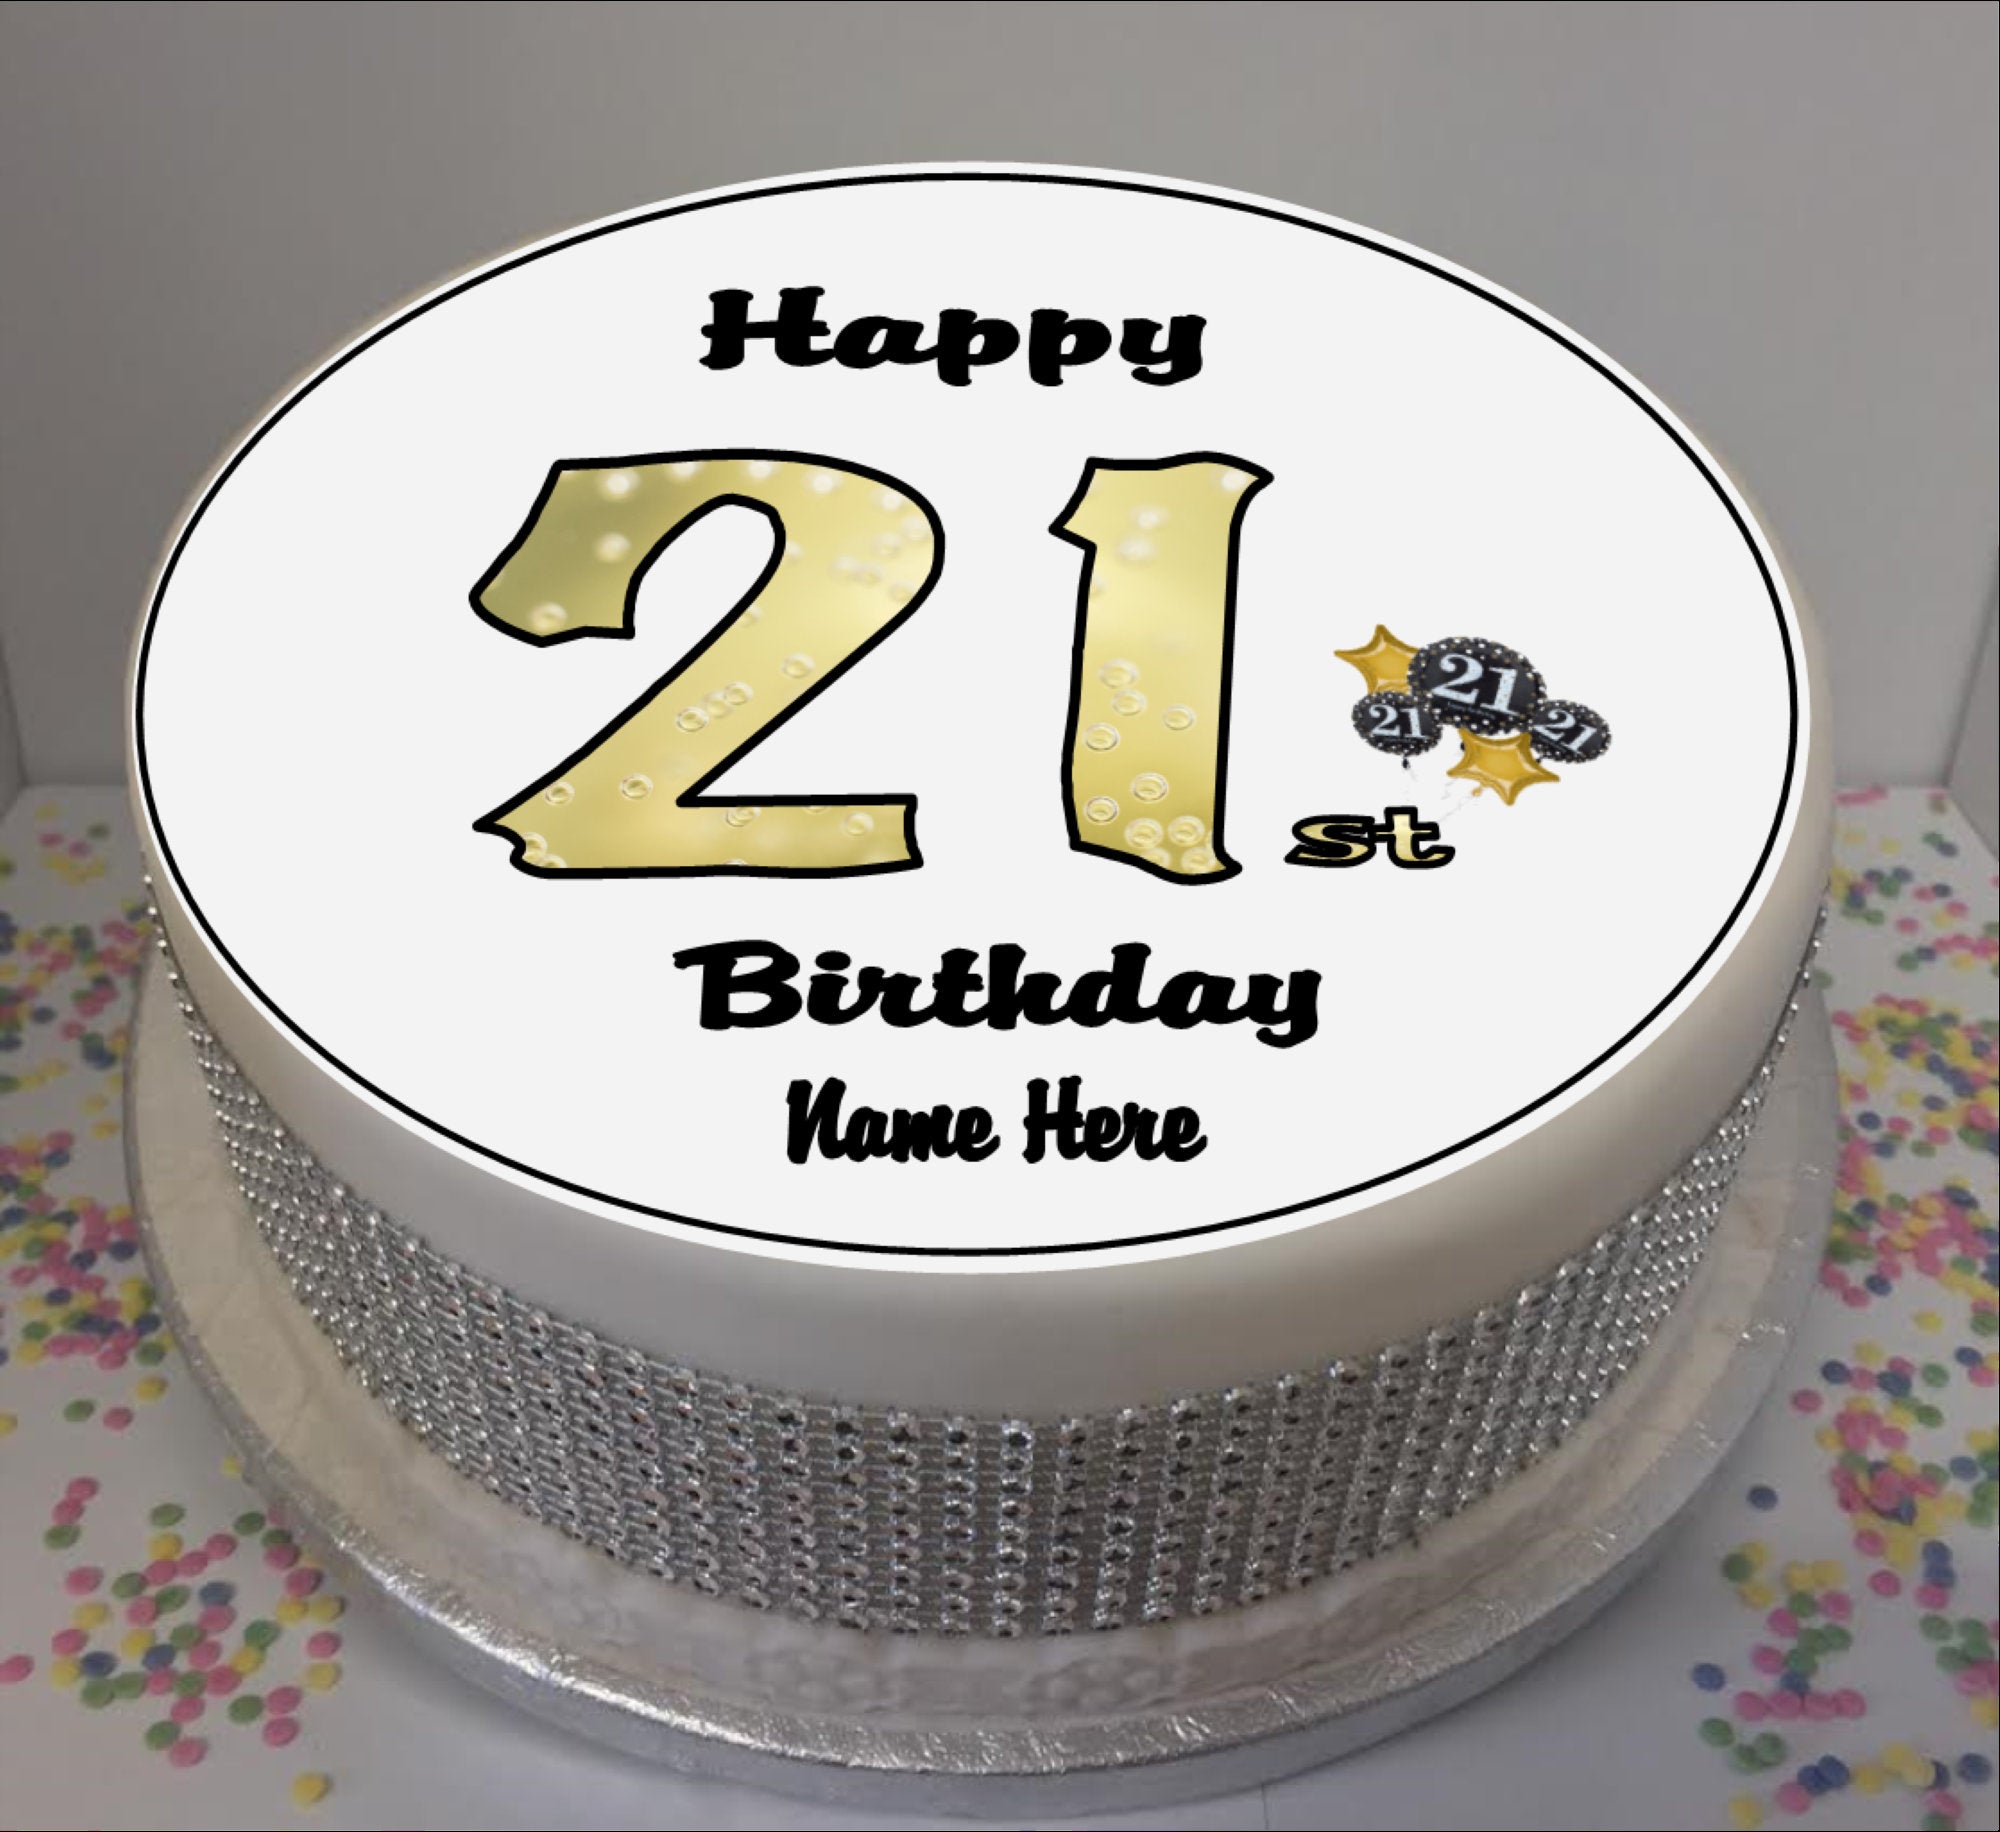 Milestone Birthday Cake Toppers (18th, 21st & Special Birthdays) - Birthday  Cake Decorations - Cake Decorations & Cake Toppers